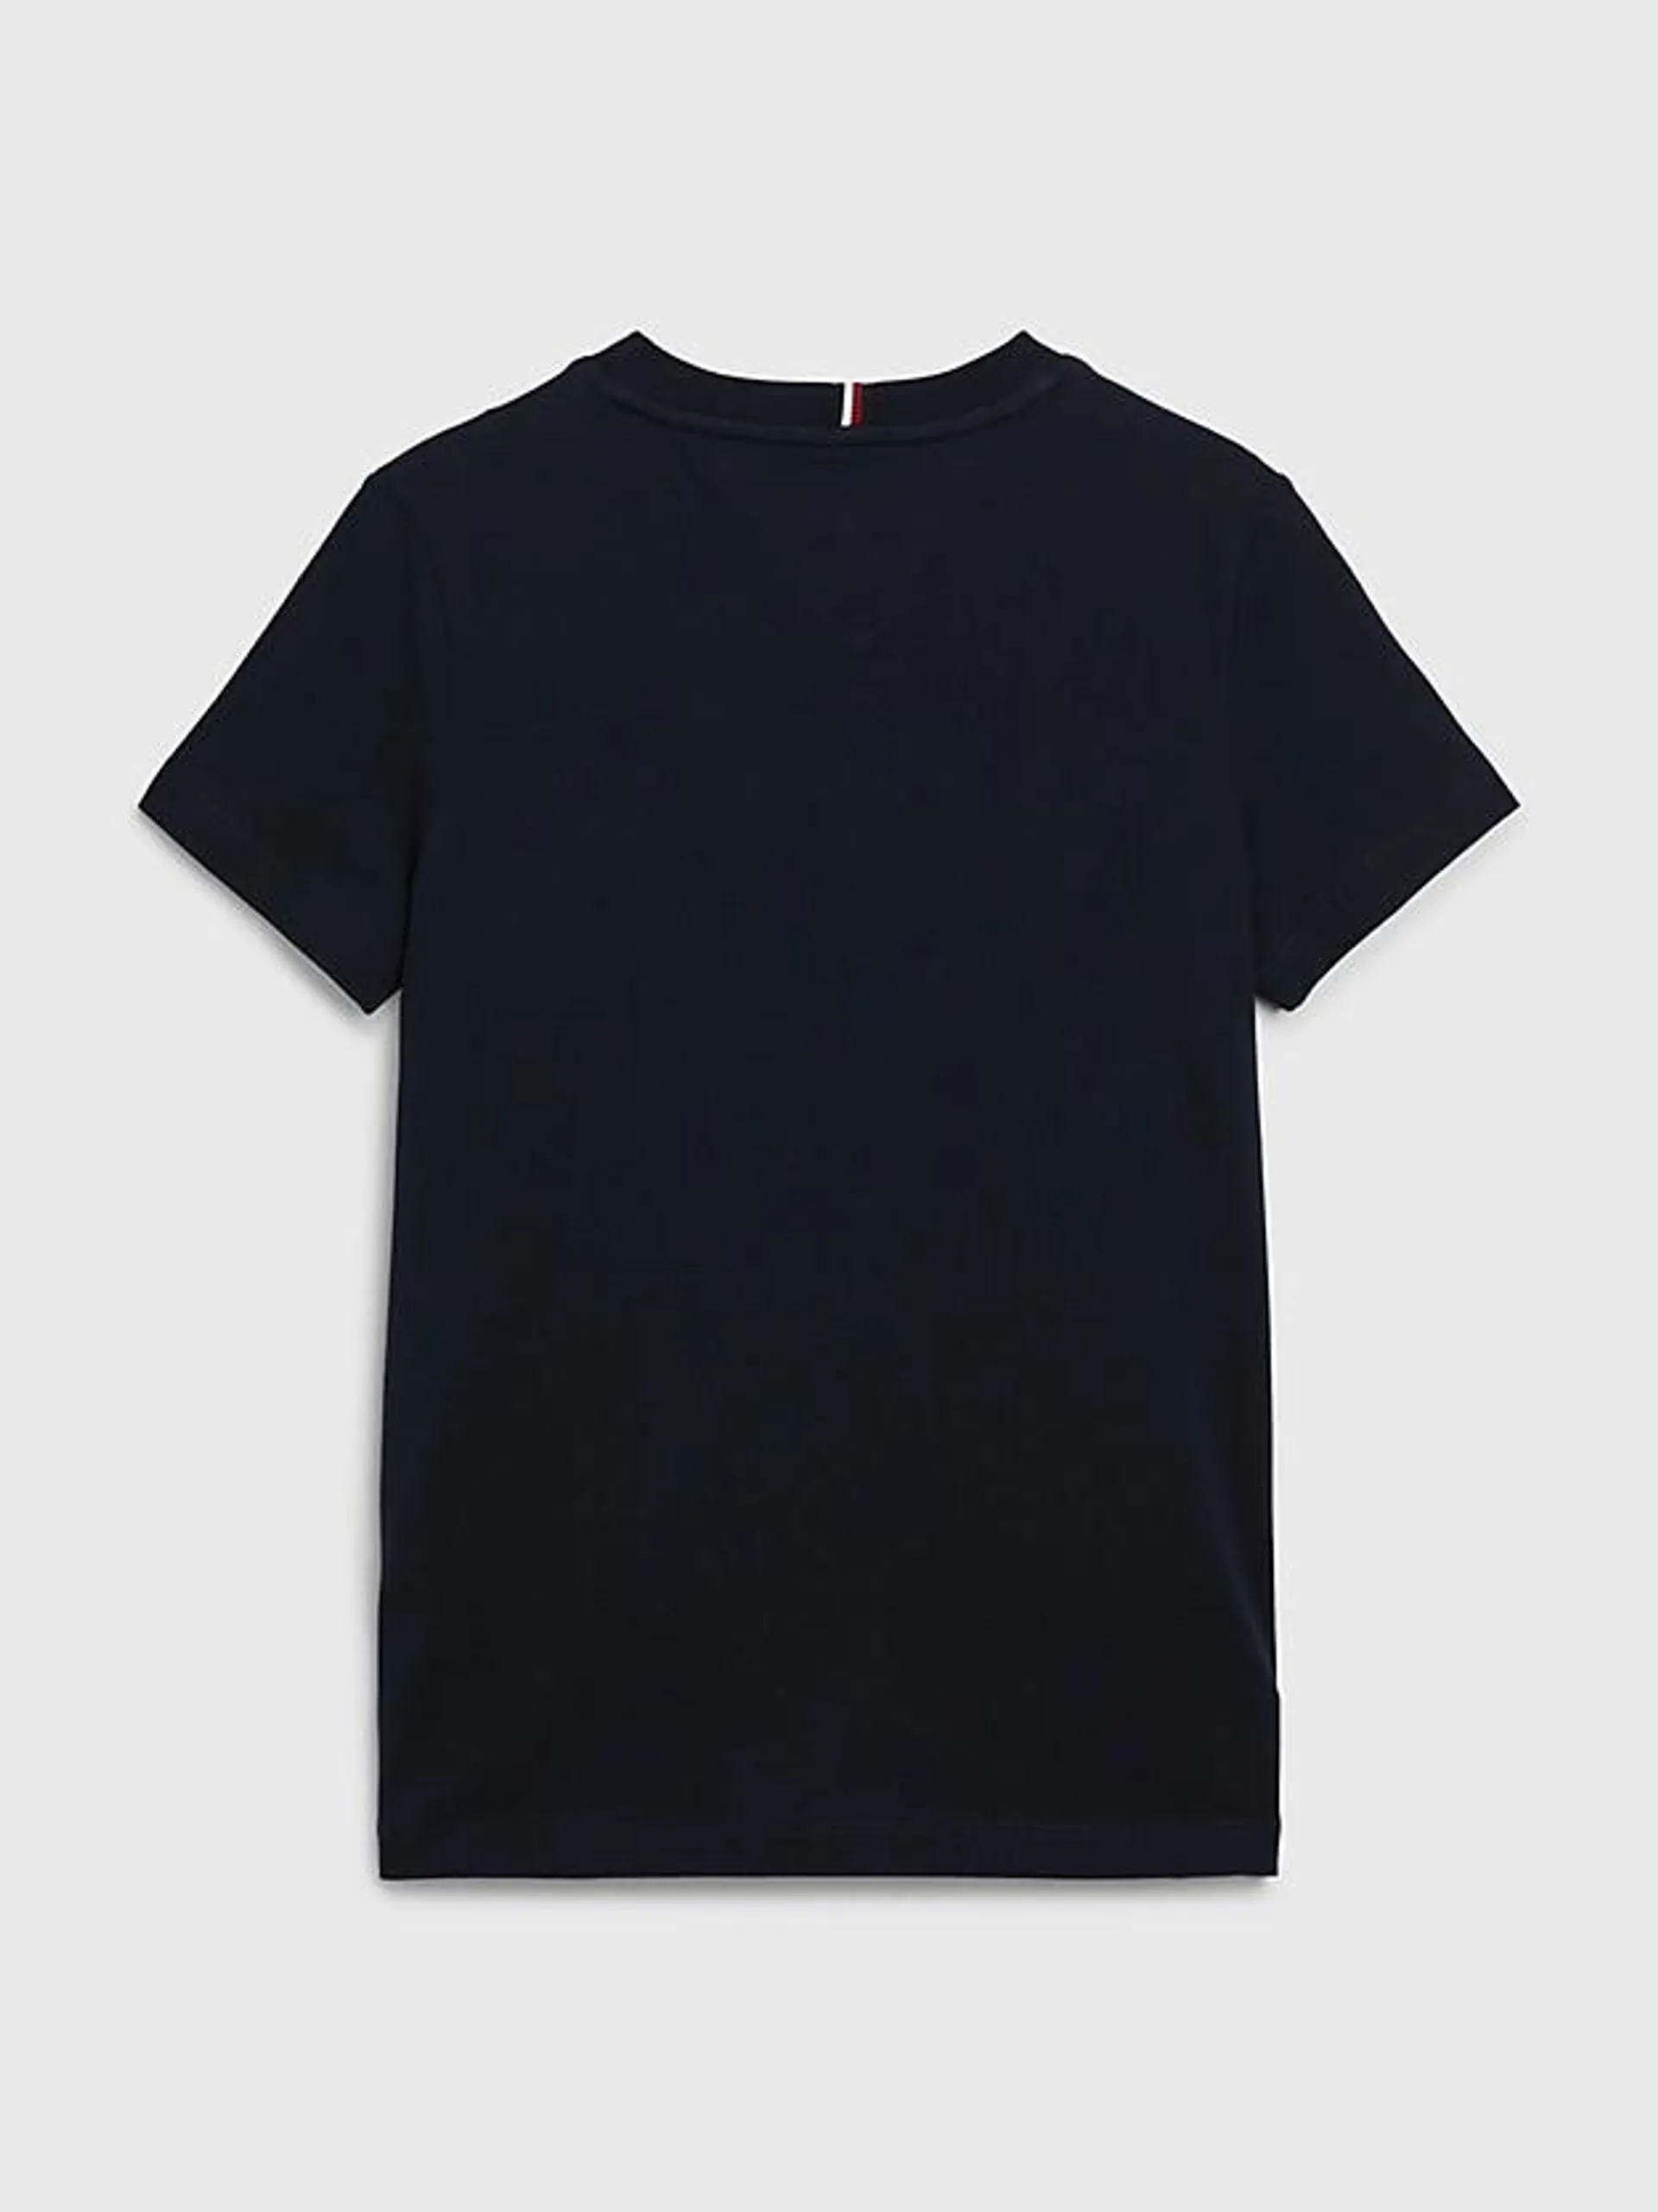 TH Monogram Embroidery T-Shirt